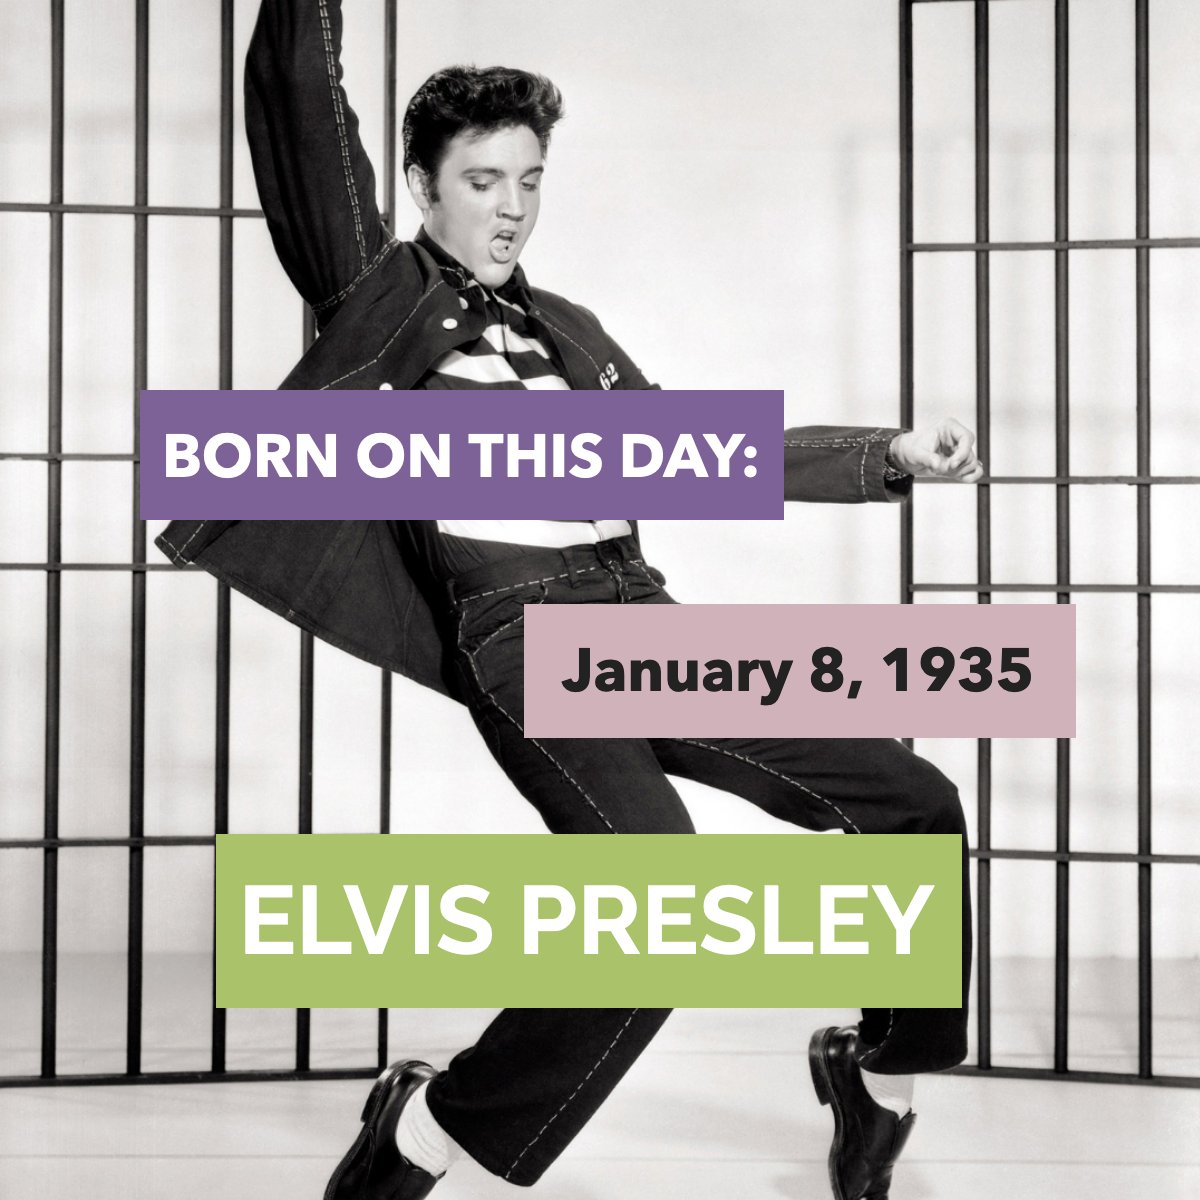 Today marks the birthday of the King of Rock & Roll.

What's your favorite Elvis movie or song 

#musicicon    #borntoday    #bornonthisday    #famousbirthdays    #elvispresleyforever    #elvispresley    #elvisaaronpresley    #elvis 

#HomeForSale #SimiValleyHOmes